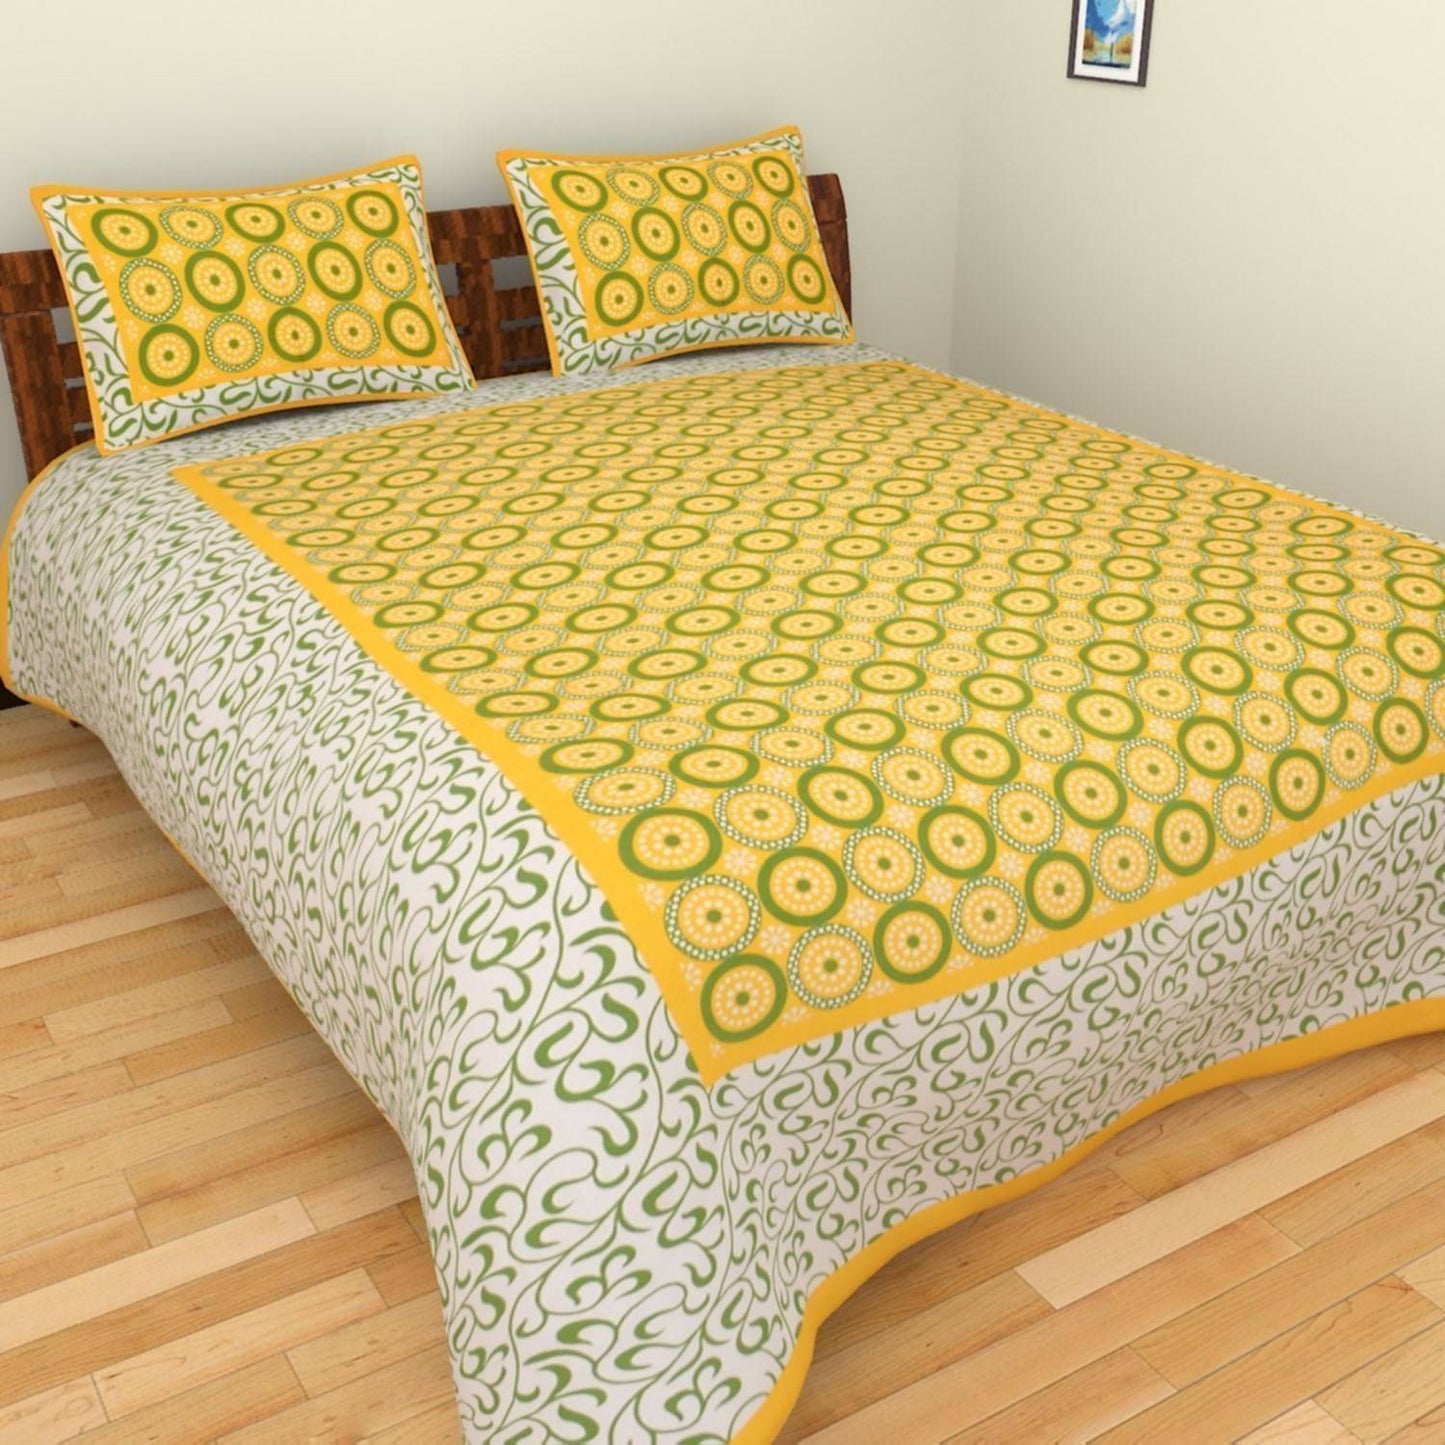 100% Cotton Jaipuri Traditional King Size  Double Bed Bedsheet with 2 Pillow Covers www.jaipurtohome.com